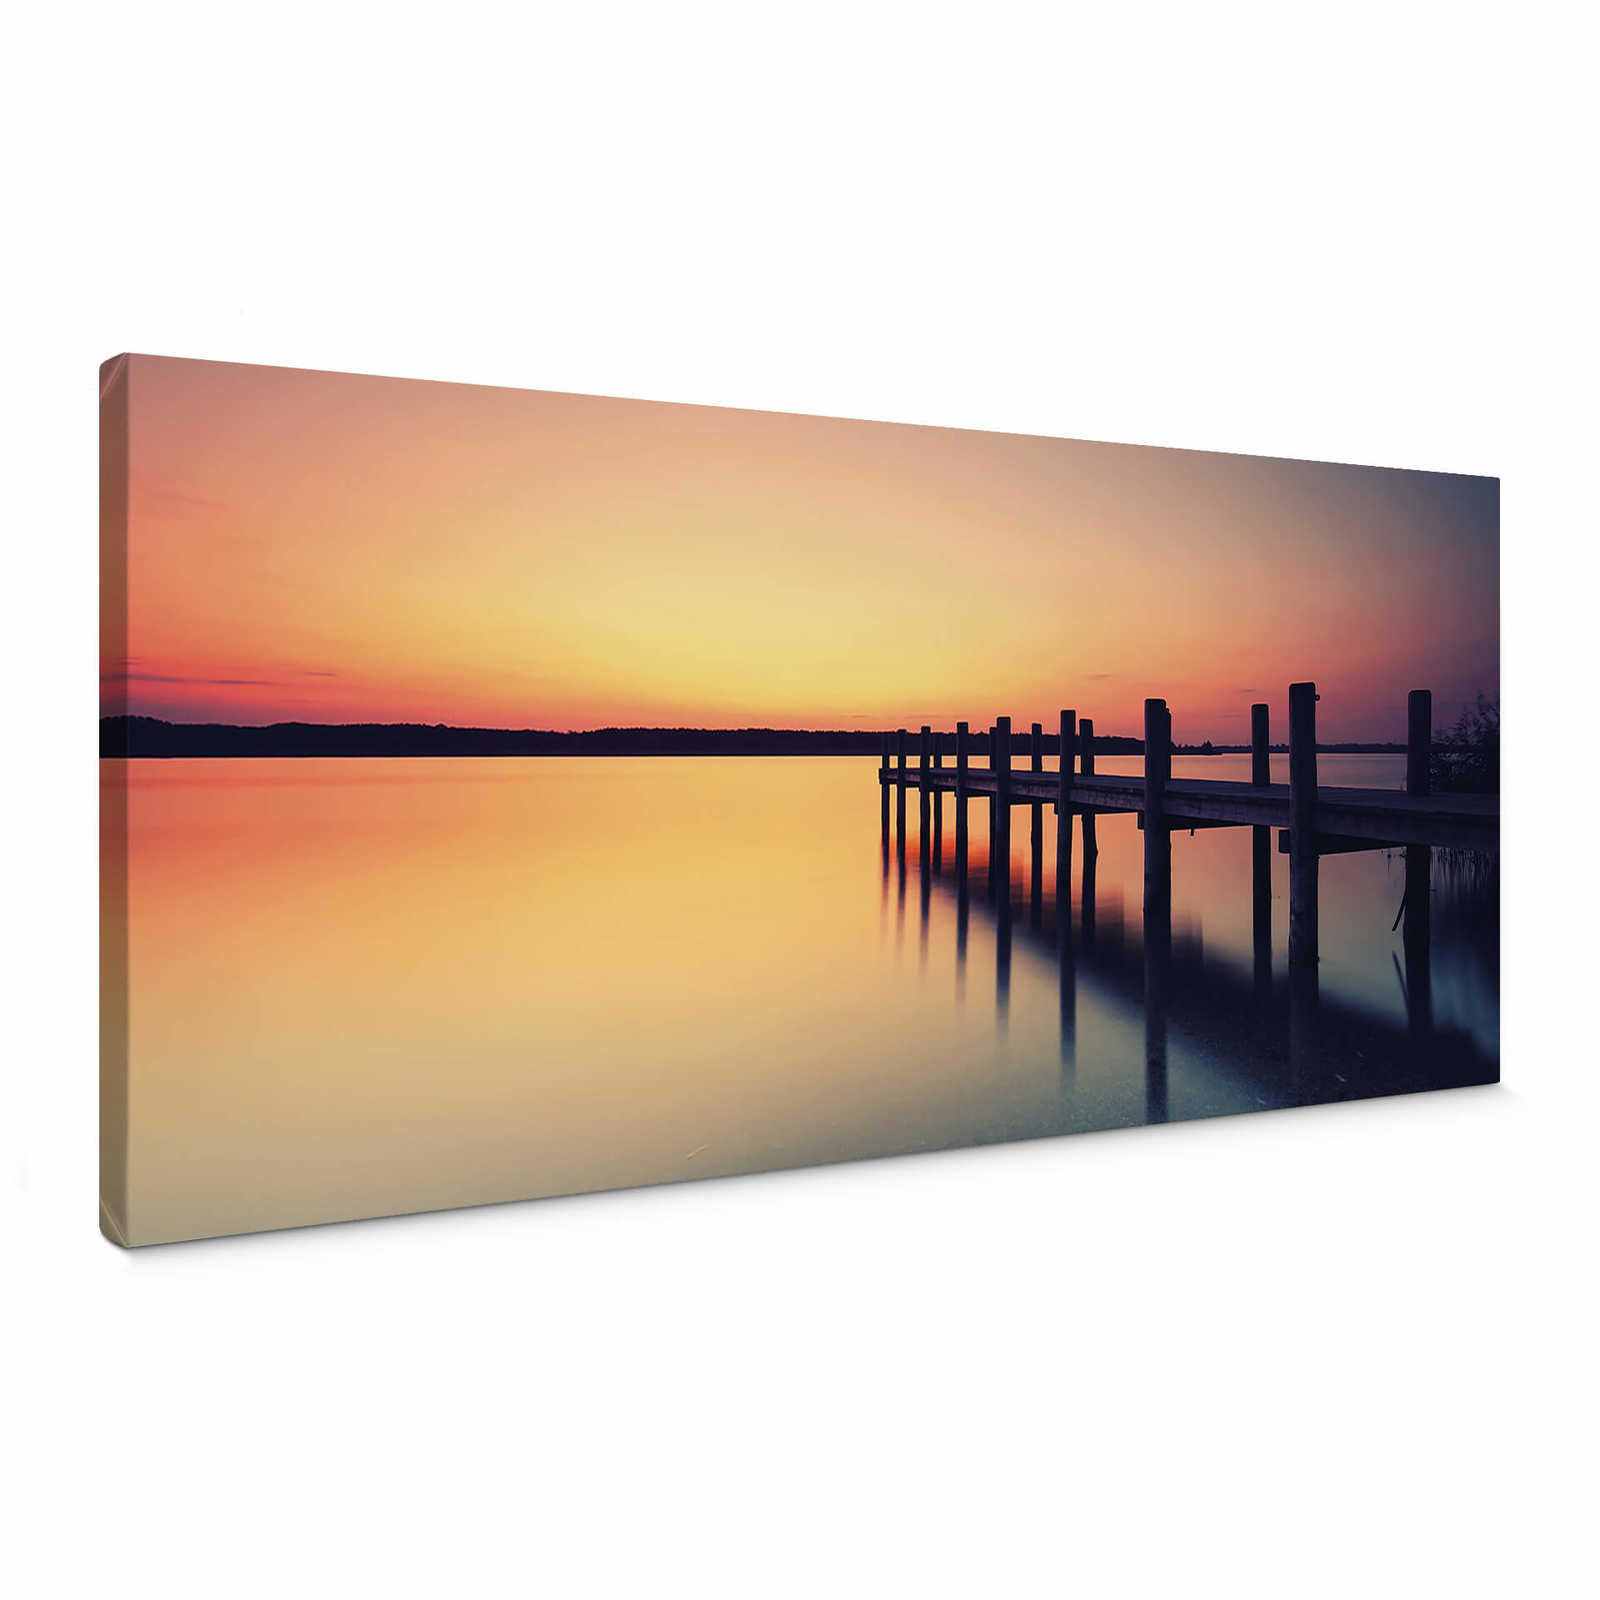         Panoramic canvas print of a bridge on the water
    